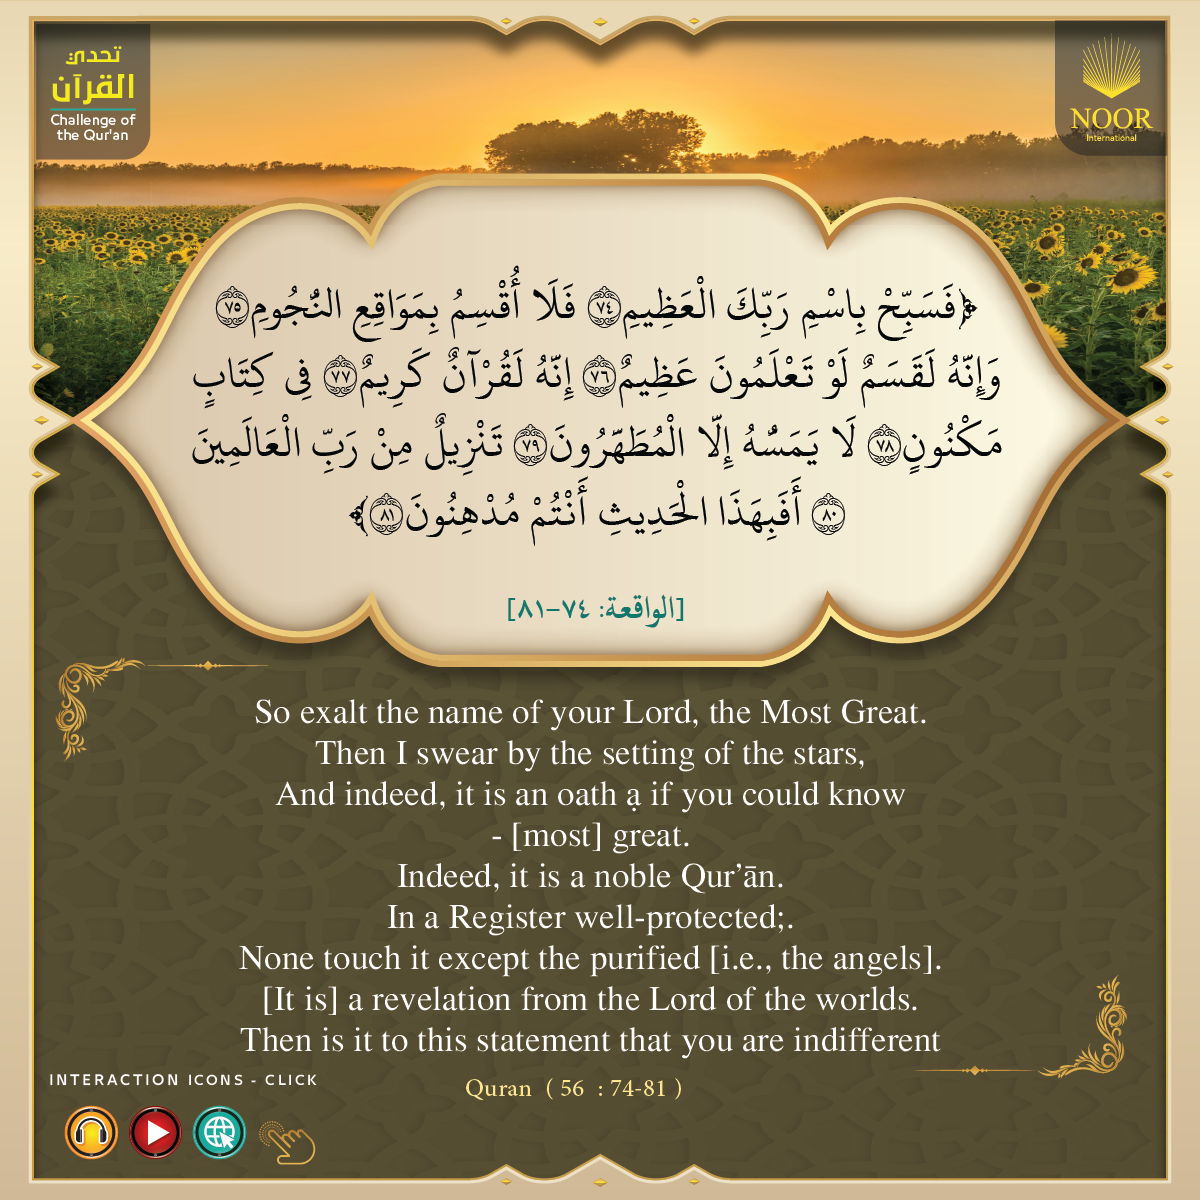 "So exalt the name of your Lord, the Most Great..."